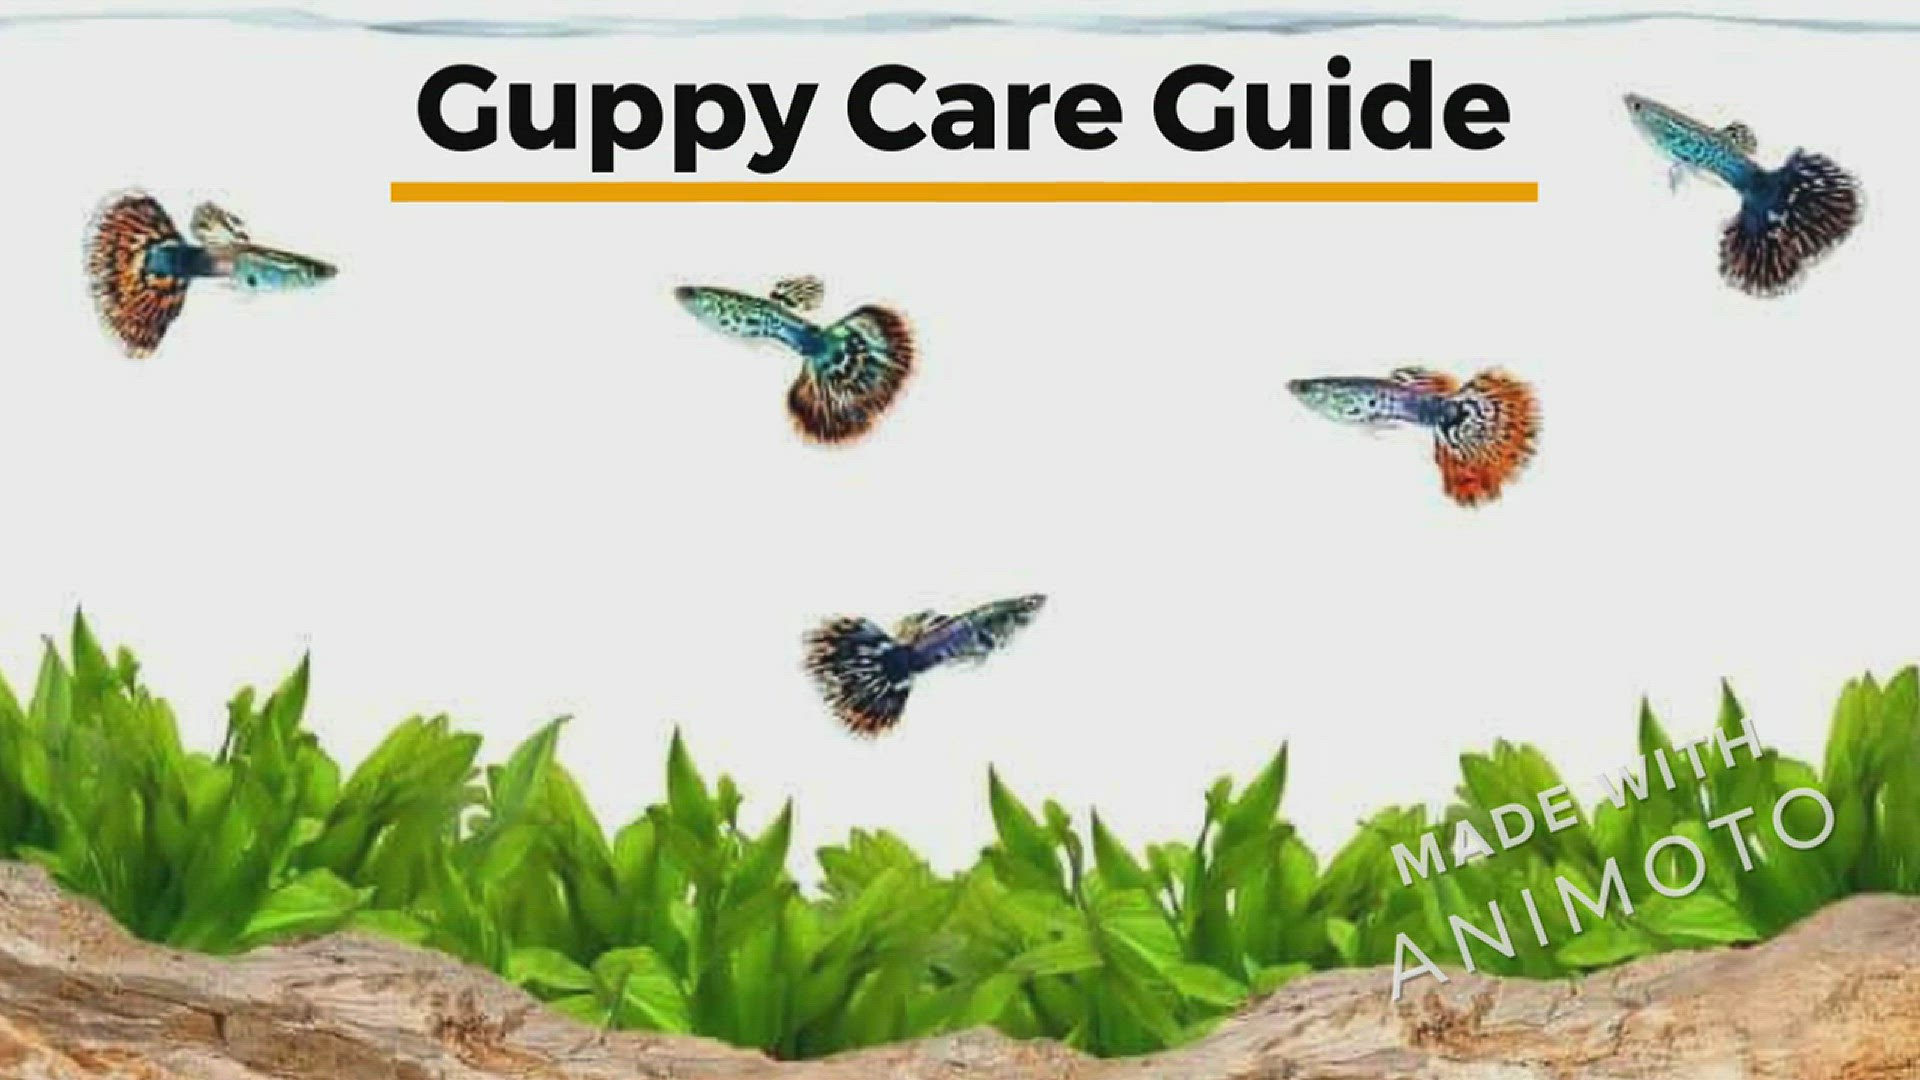 'Video thumbnail for Guppy_Care_Video'